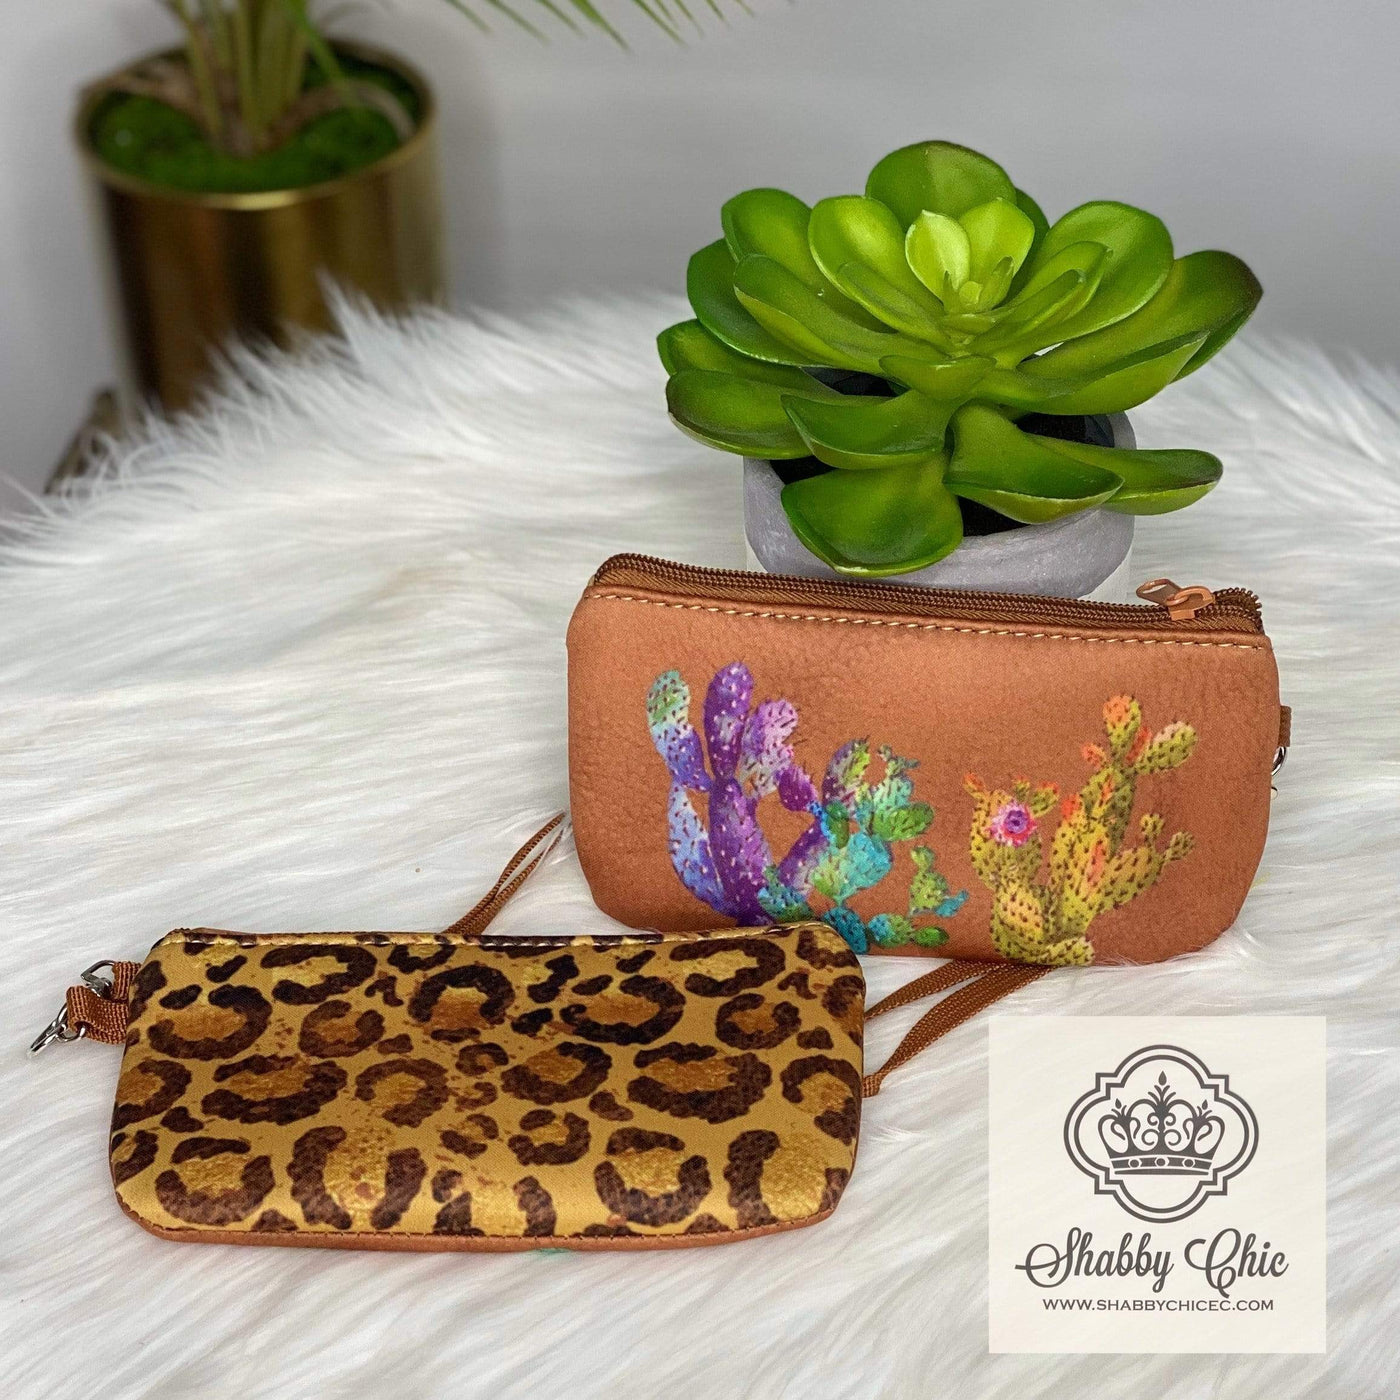 Cactus and Leopard wristlet Shabby Chic Boutique and Tanning Salon